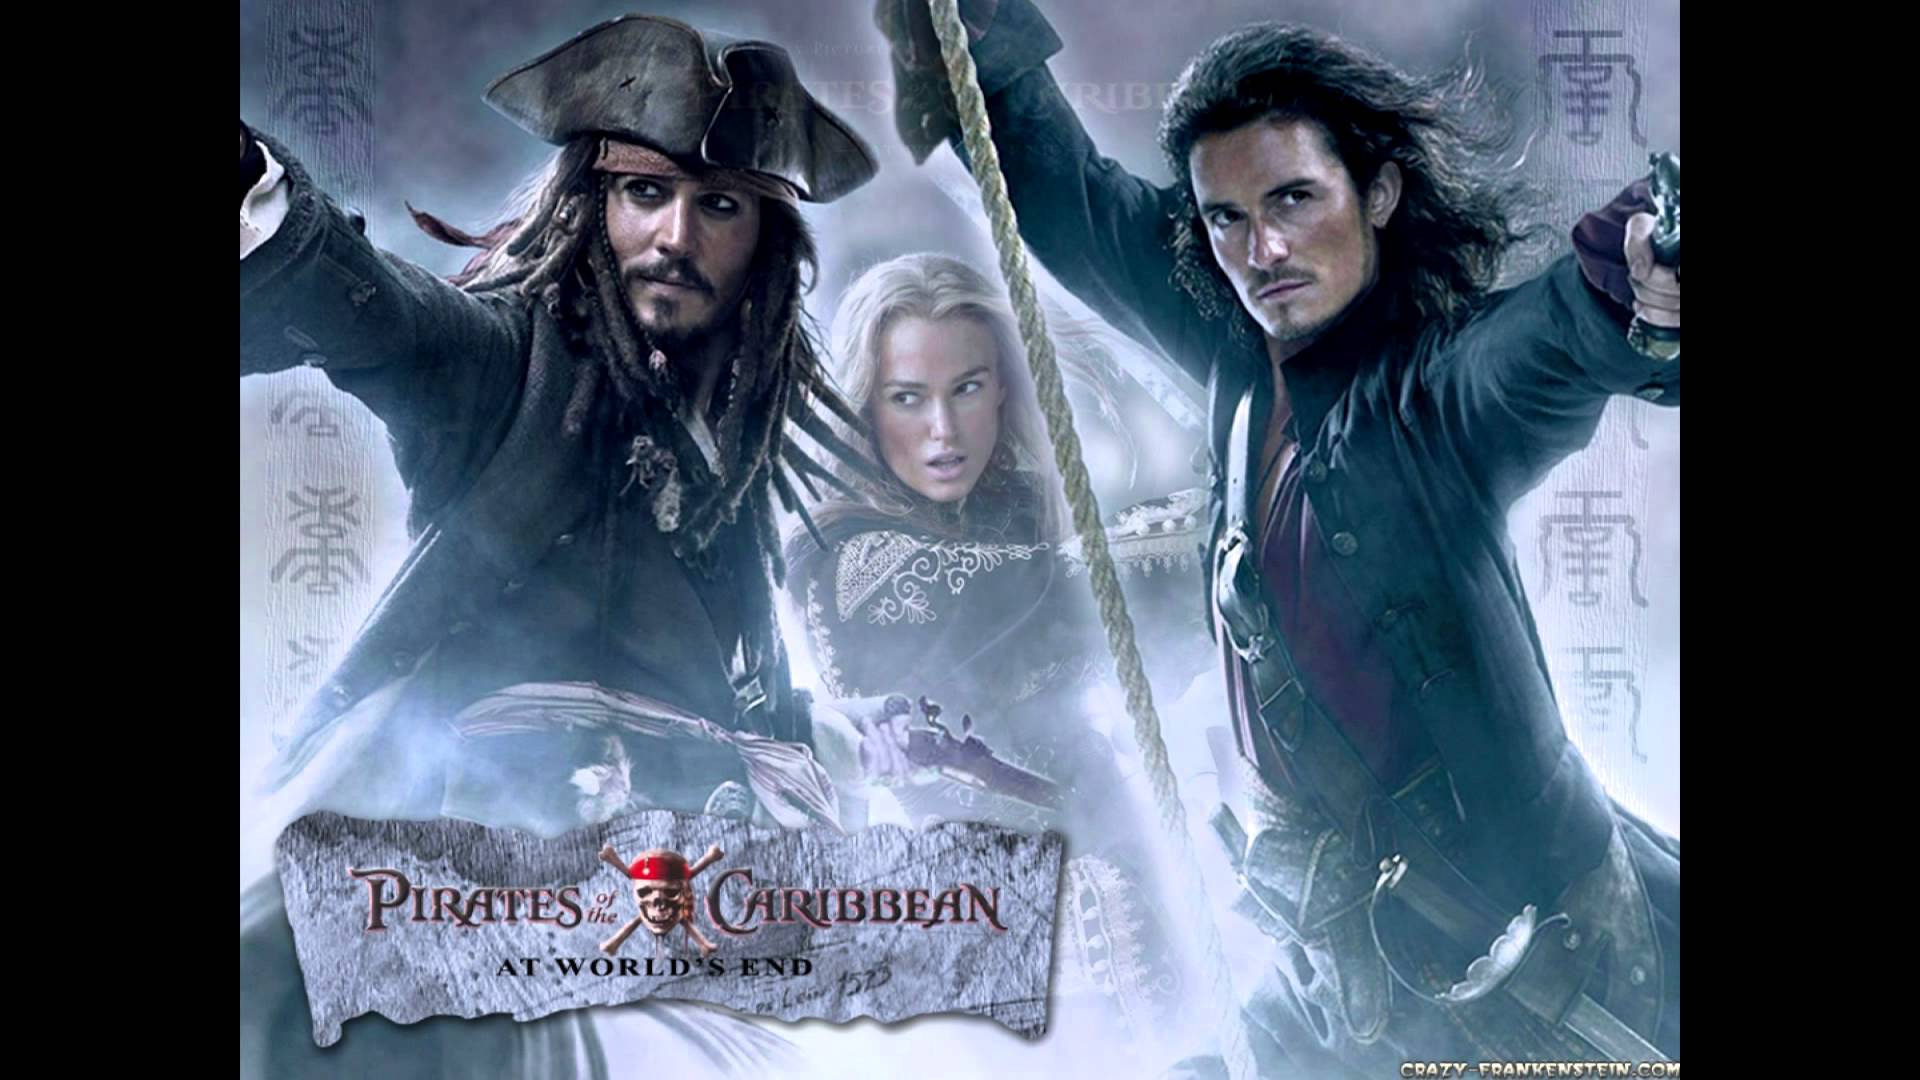 Pirates Of The Caribbean: At World's End Backgrounds, Compatible - PC, Mobile, Gadgets| 1920x1080 px